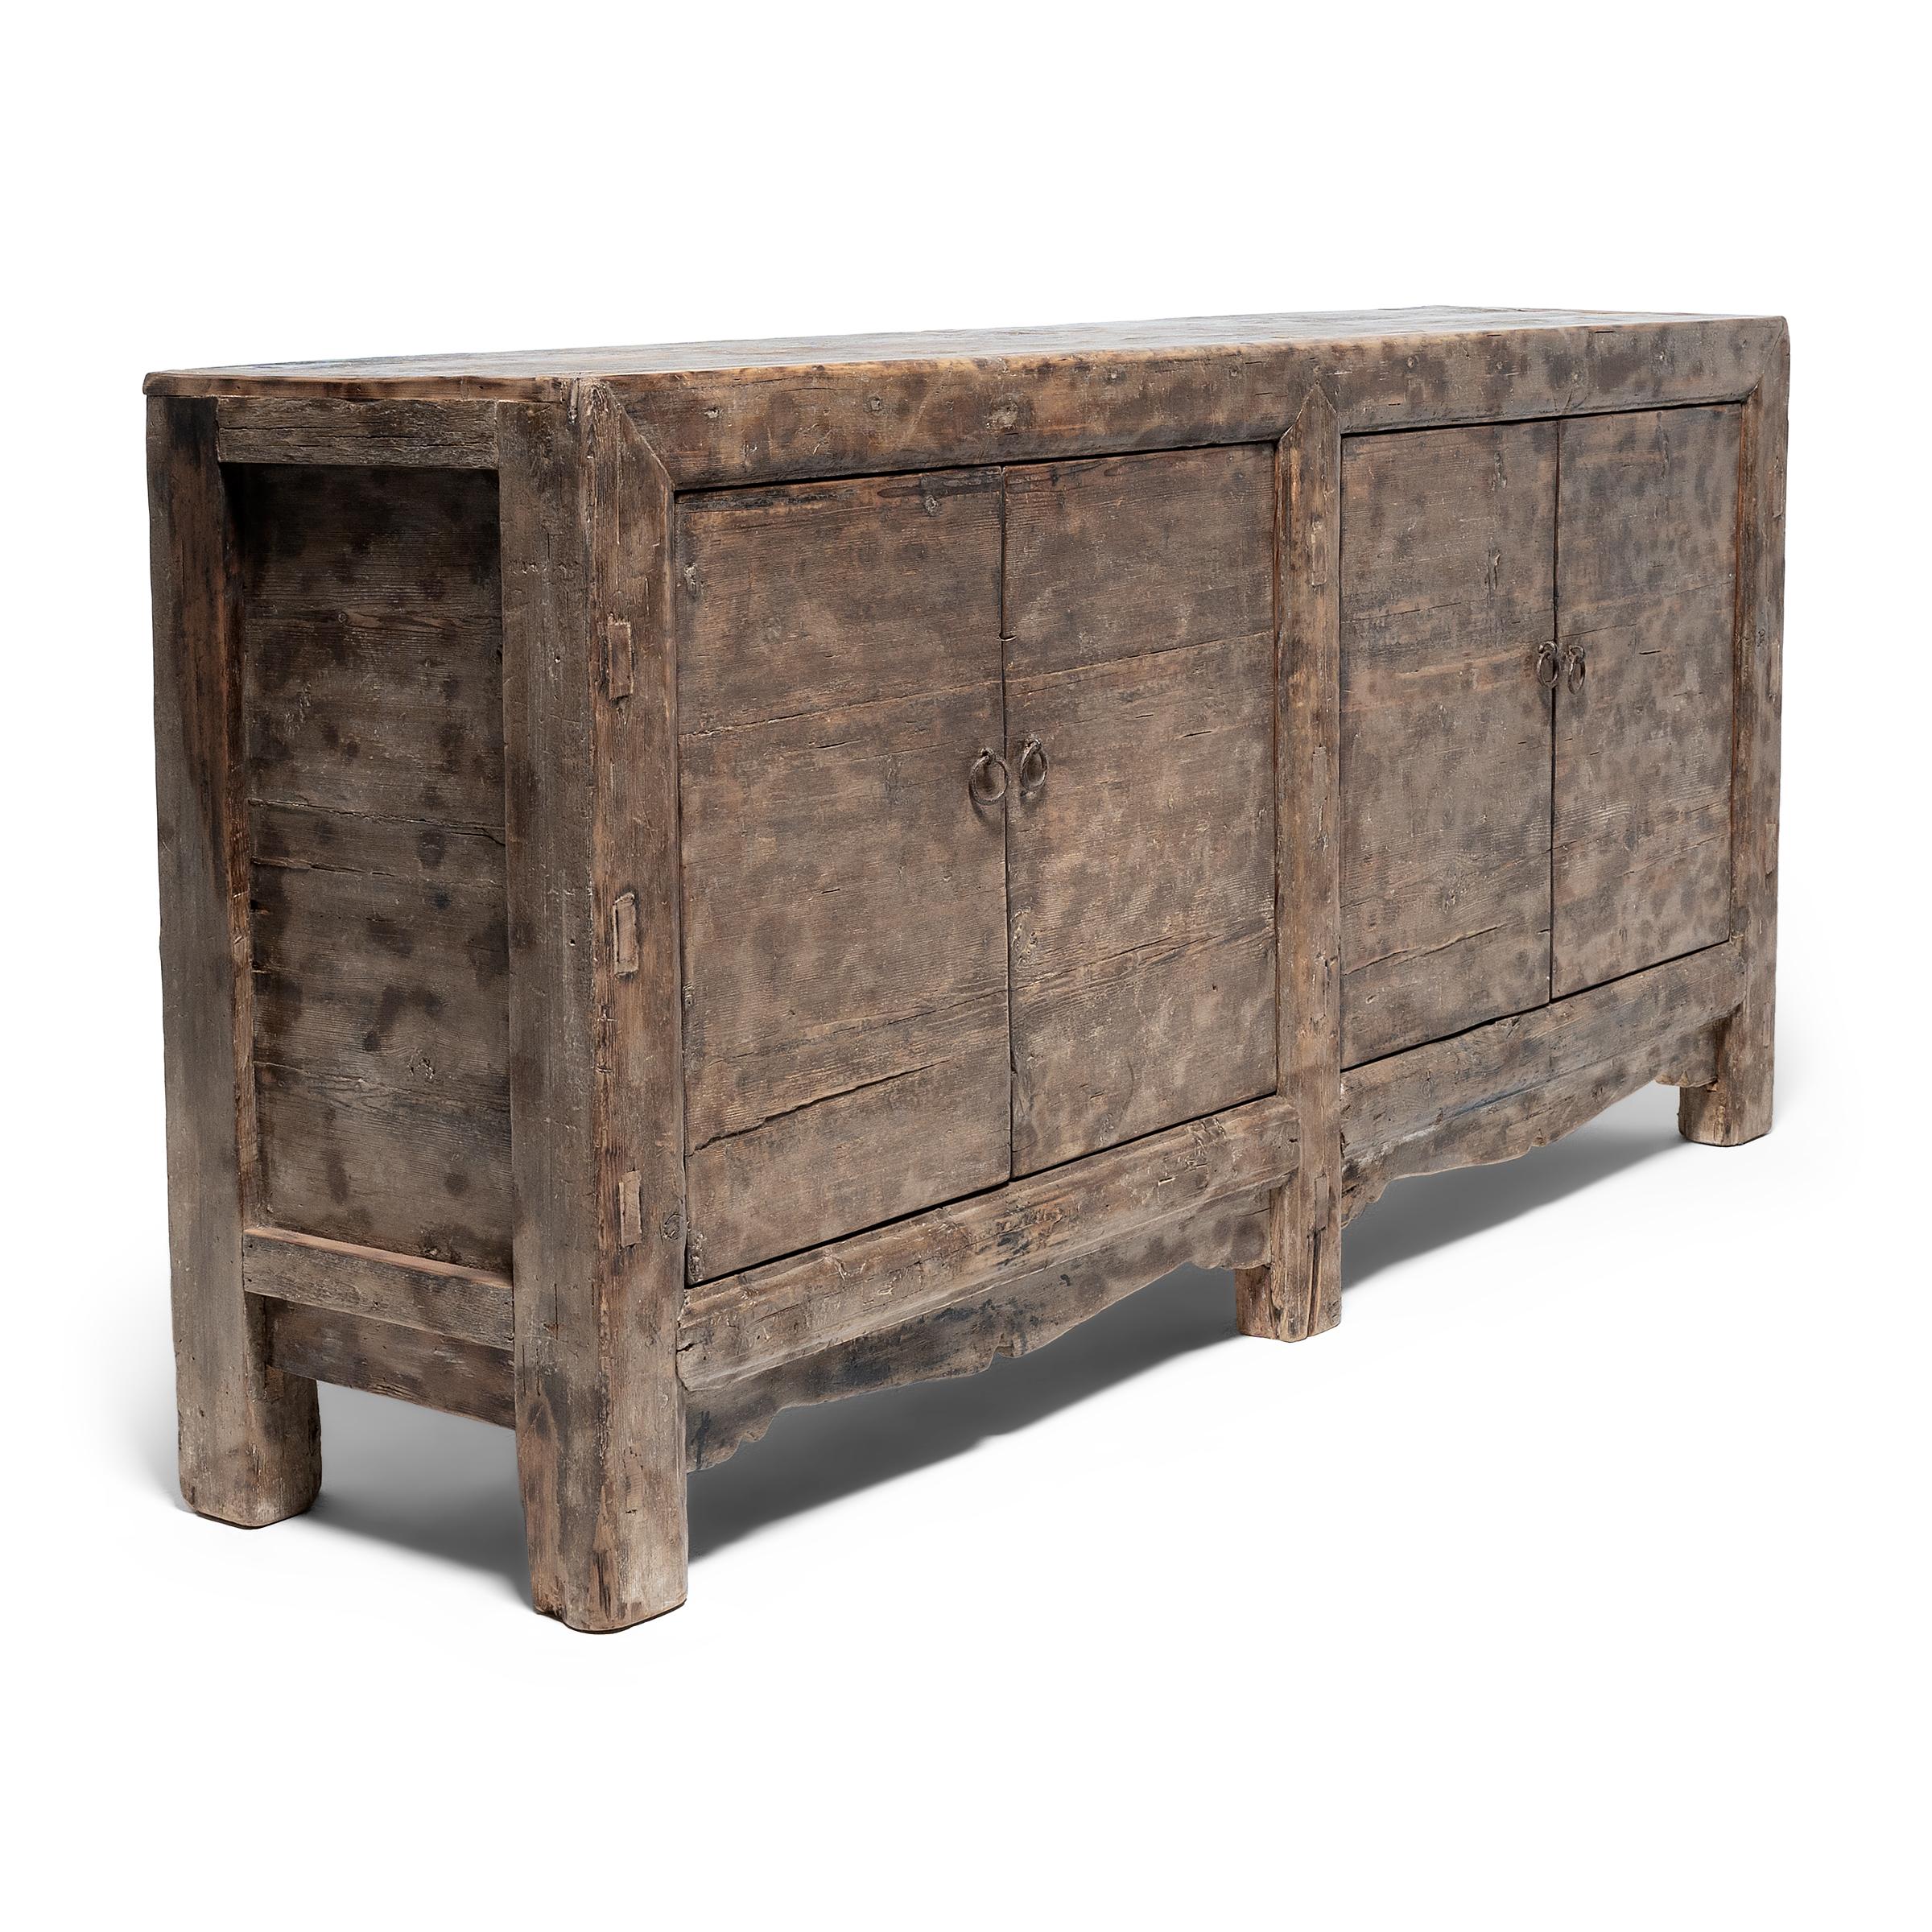 Chinese Rustic Four Door Sideboard Coffer, circa 1880